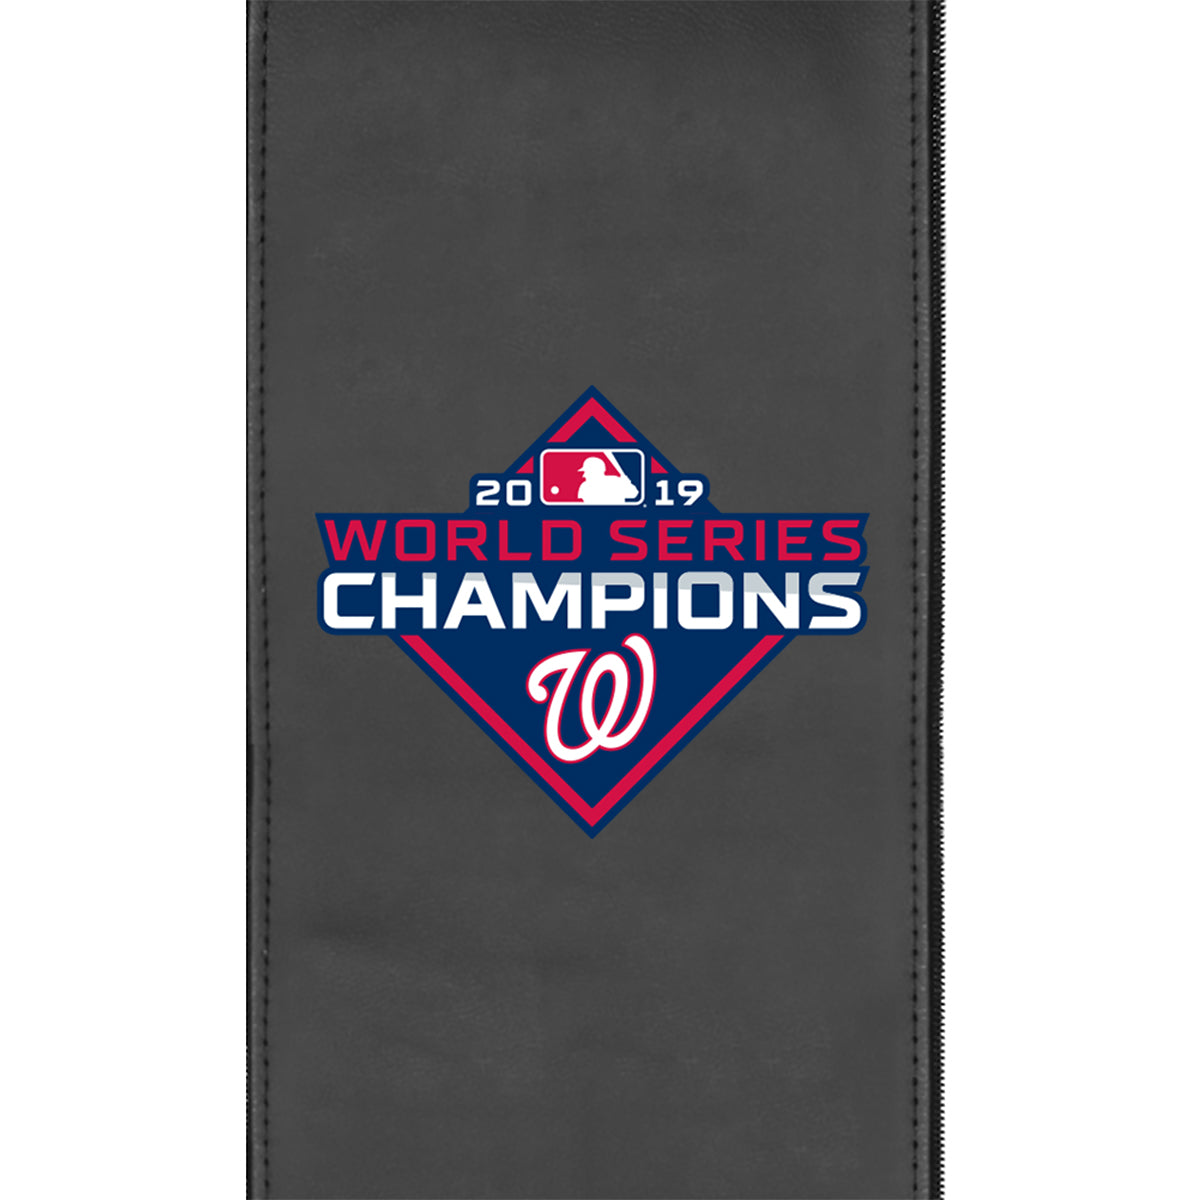 Silver Club Chair with Washington Nationals 2019 Champions